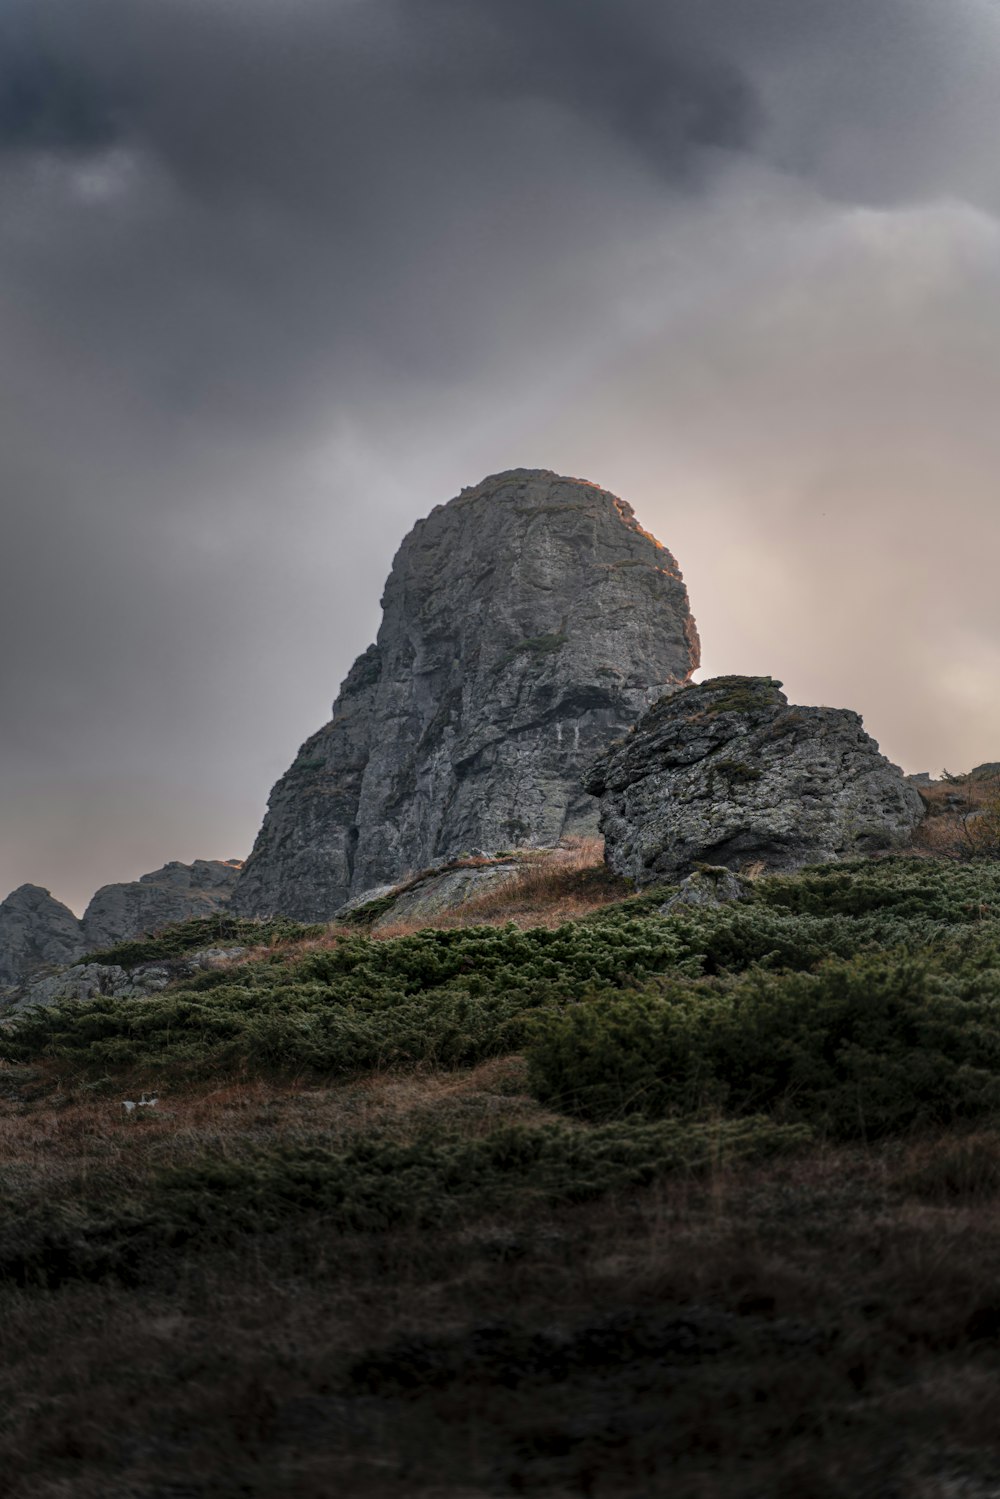 a large rock on a hill under a cloudy sky